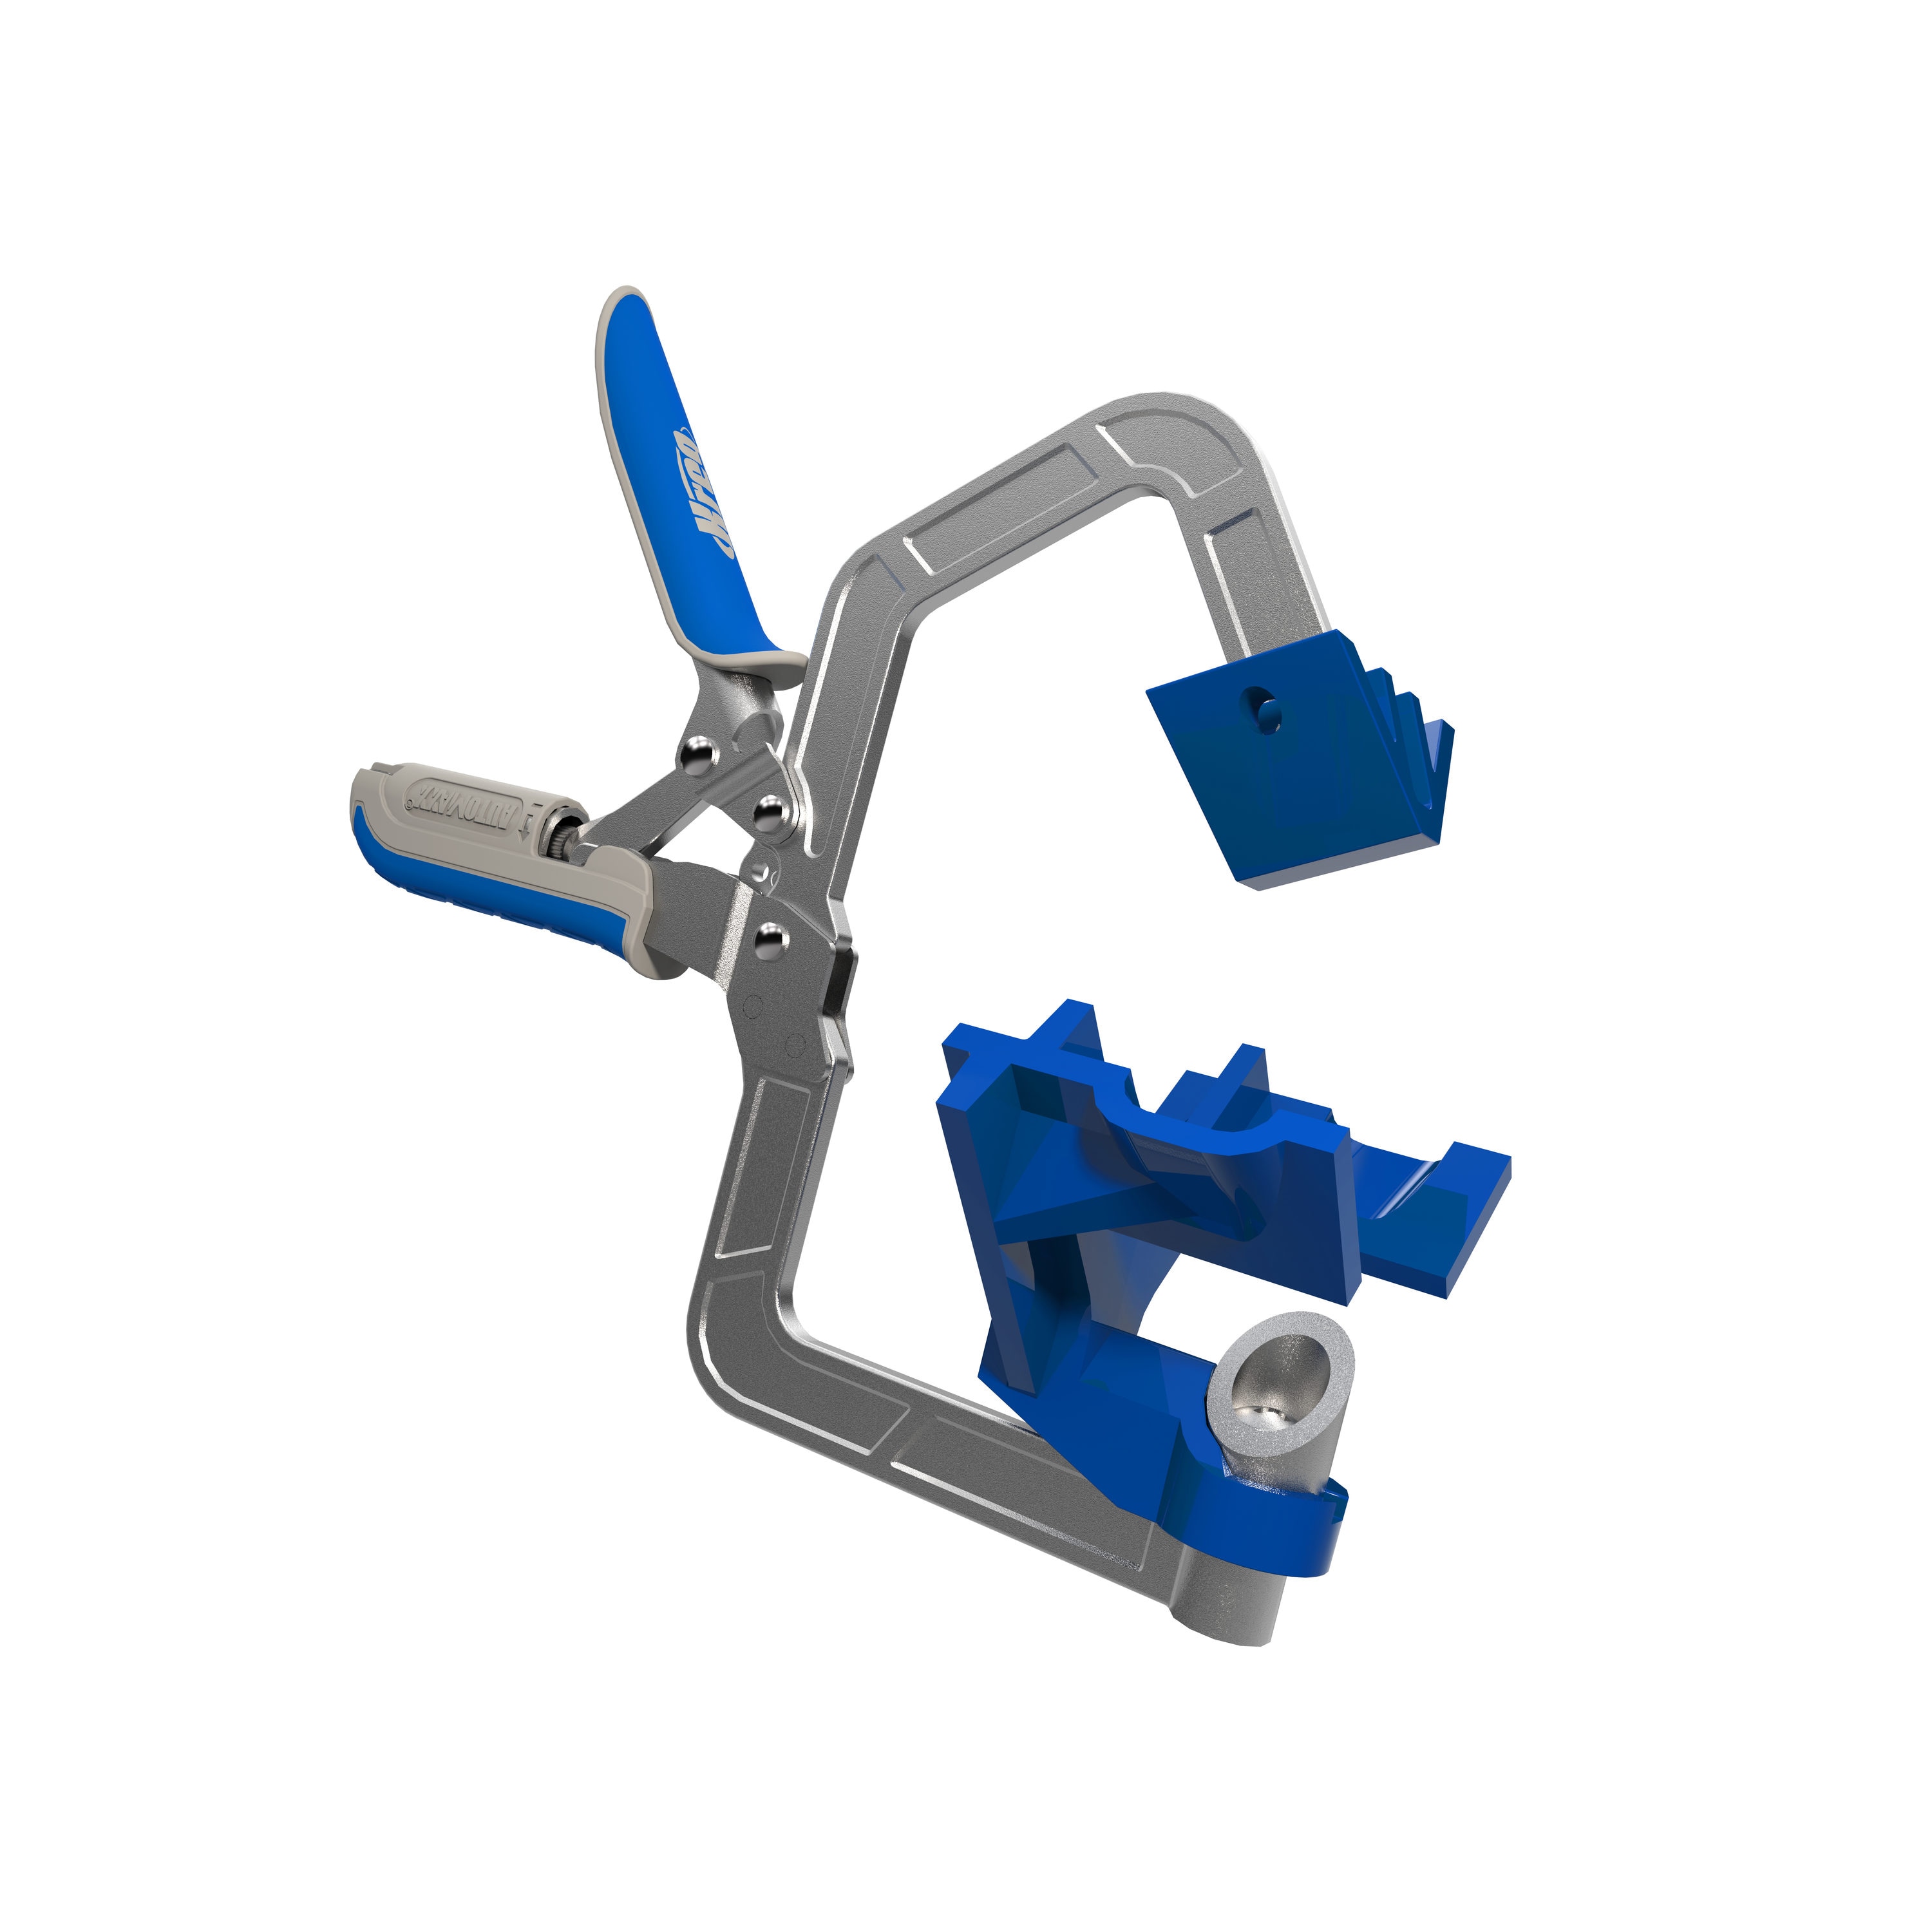 90 Degree Corner Clamps (Set of 2 Clamps)